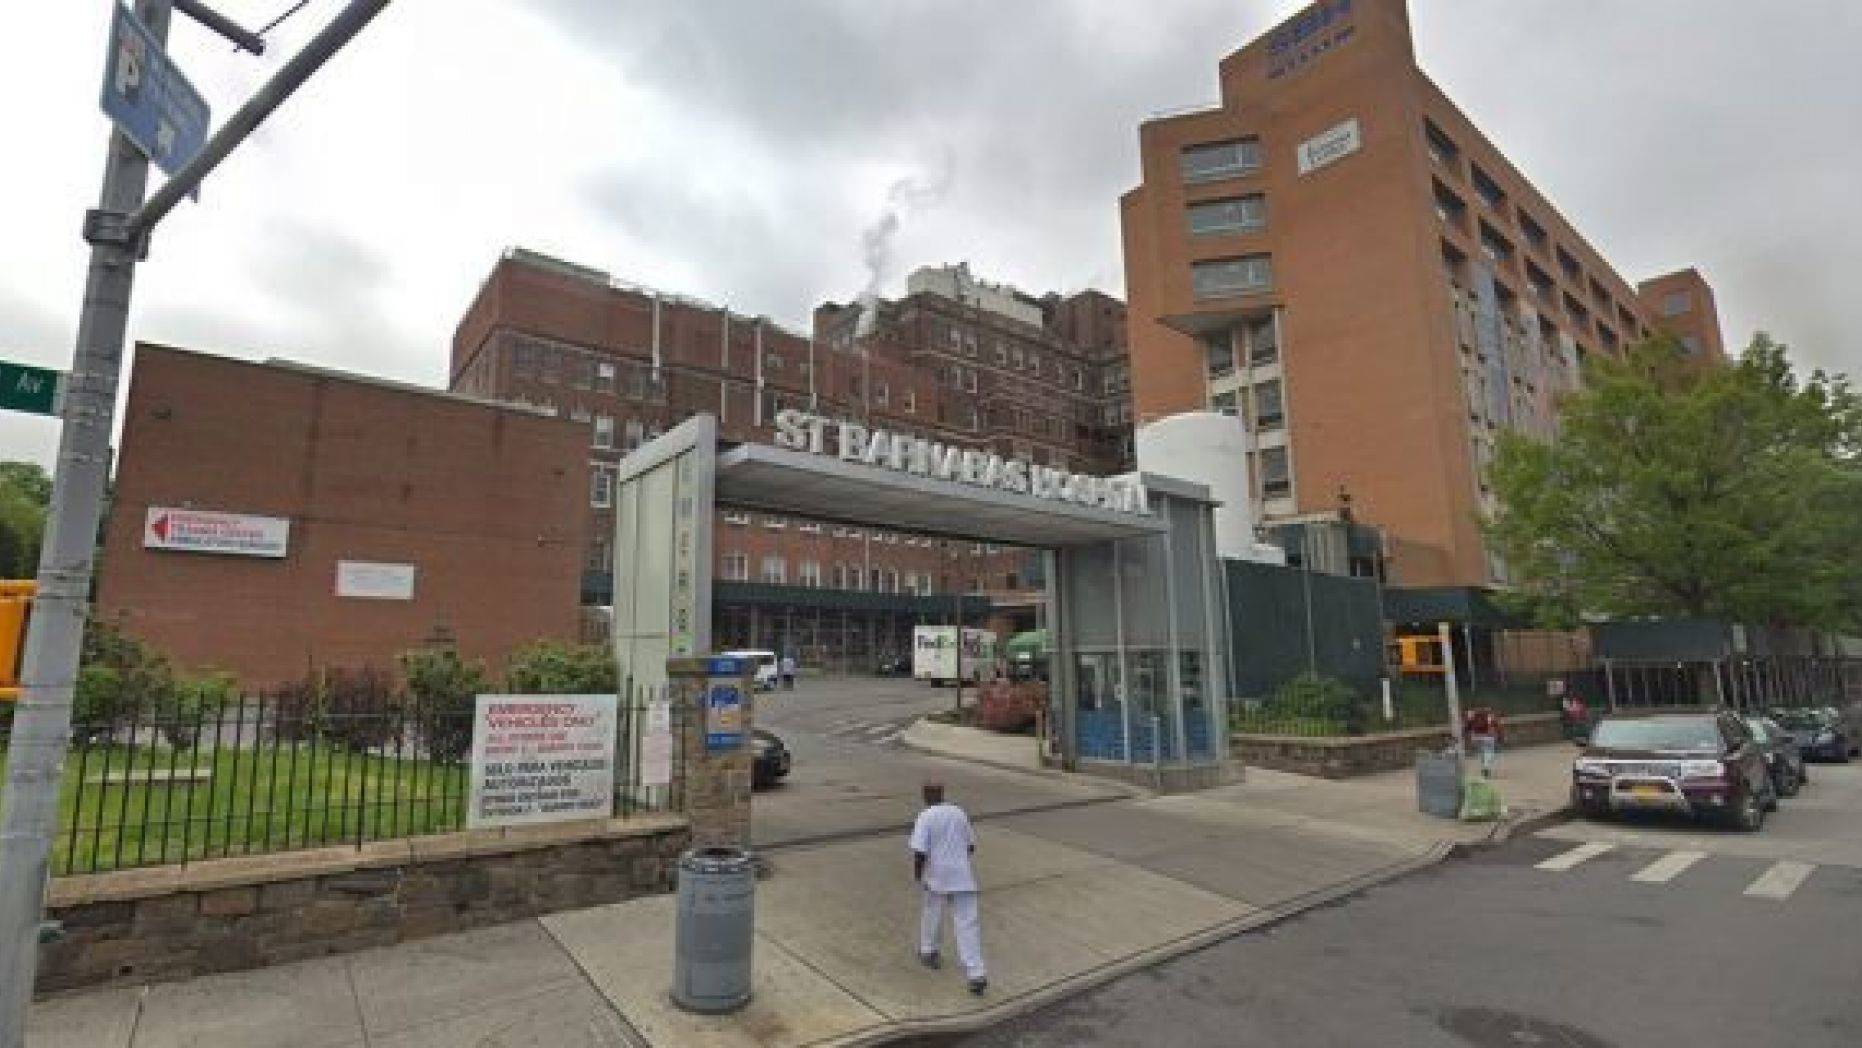 Shirell Powell is suing St. Barnabas Hospital in the Bronx over the case of mistaken identity, saying she and other relatives were put through more than a month of unnecessary grief.